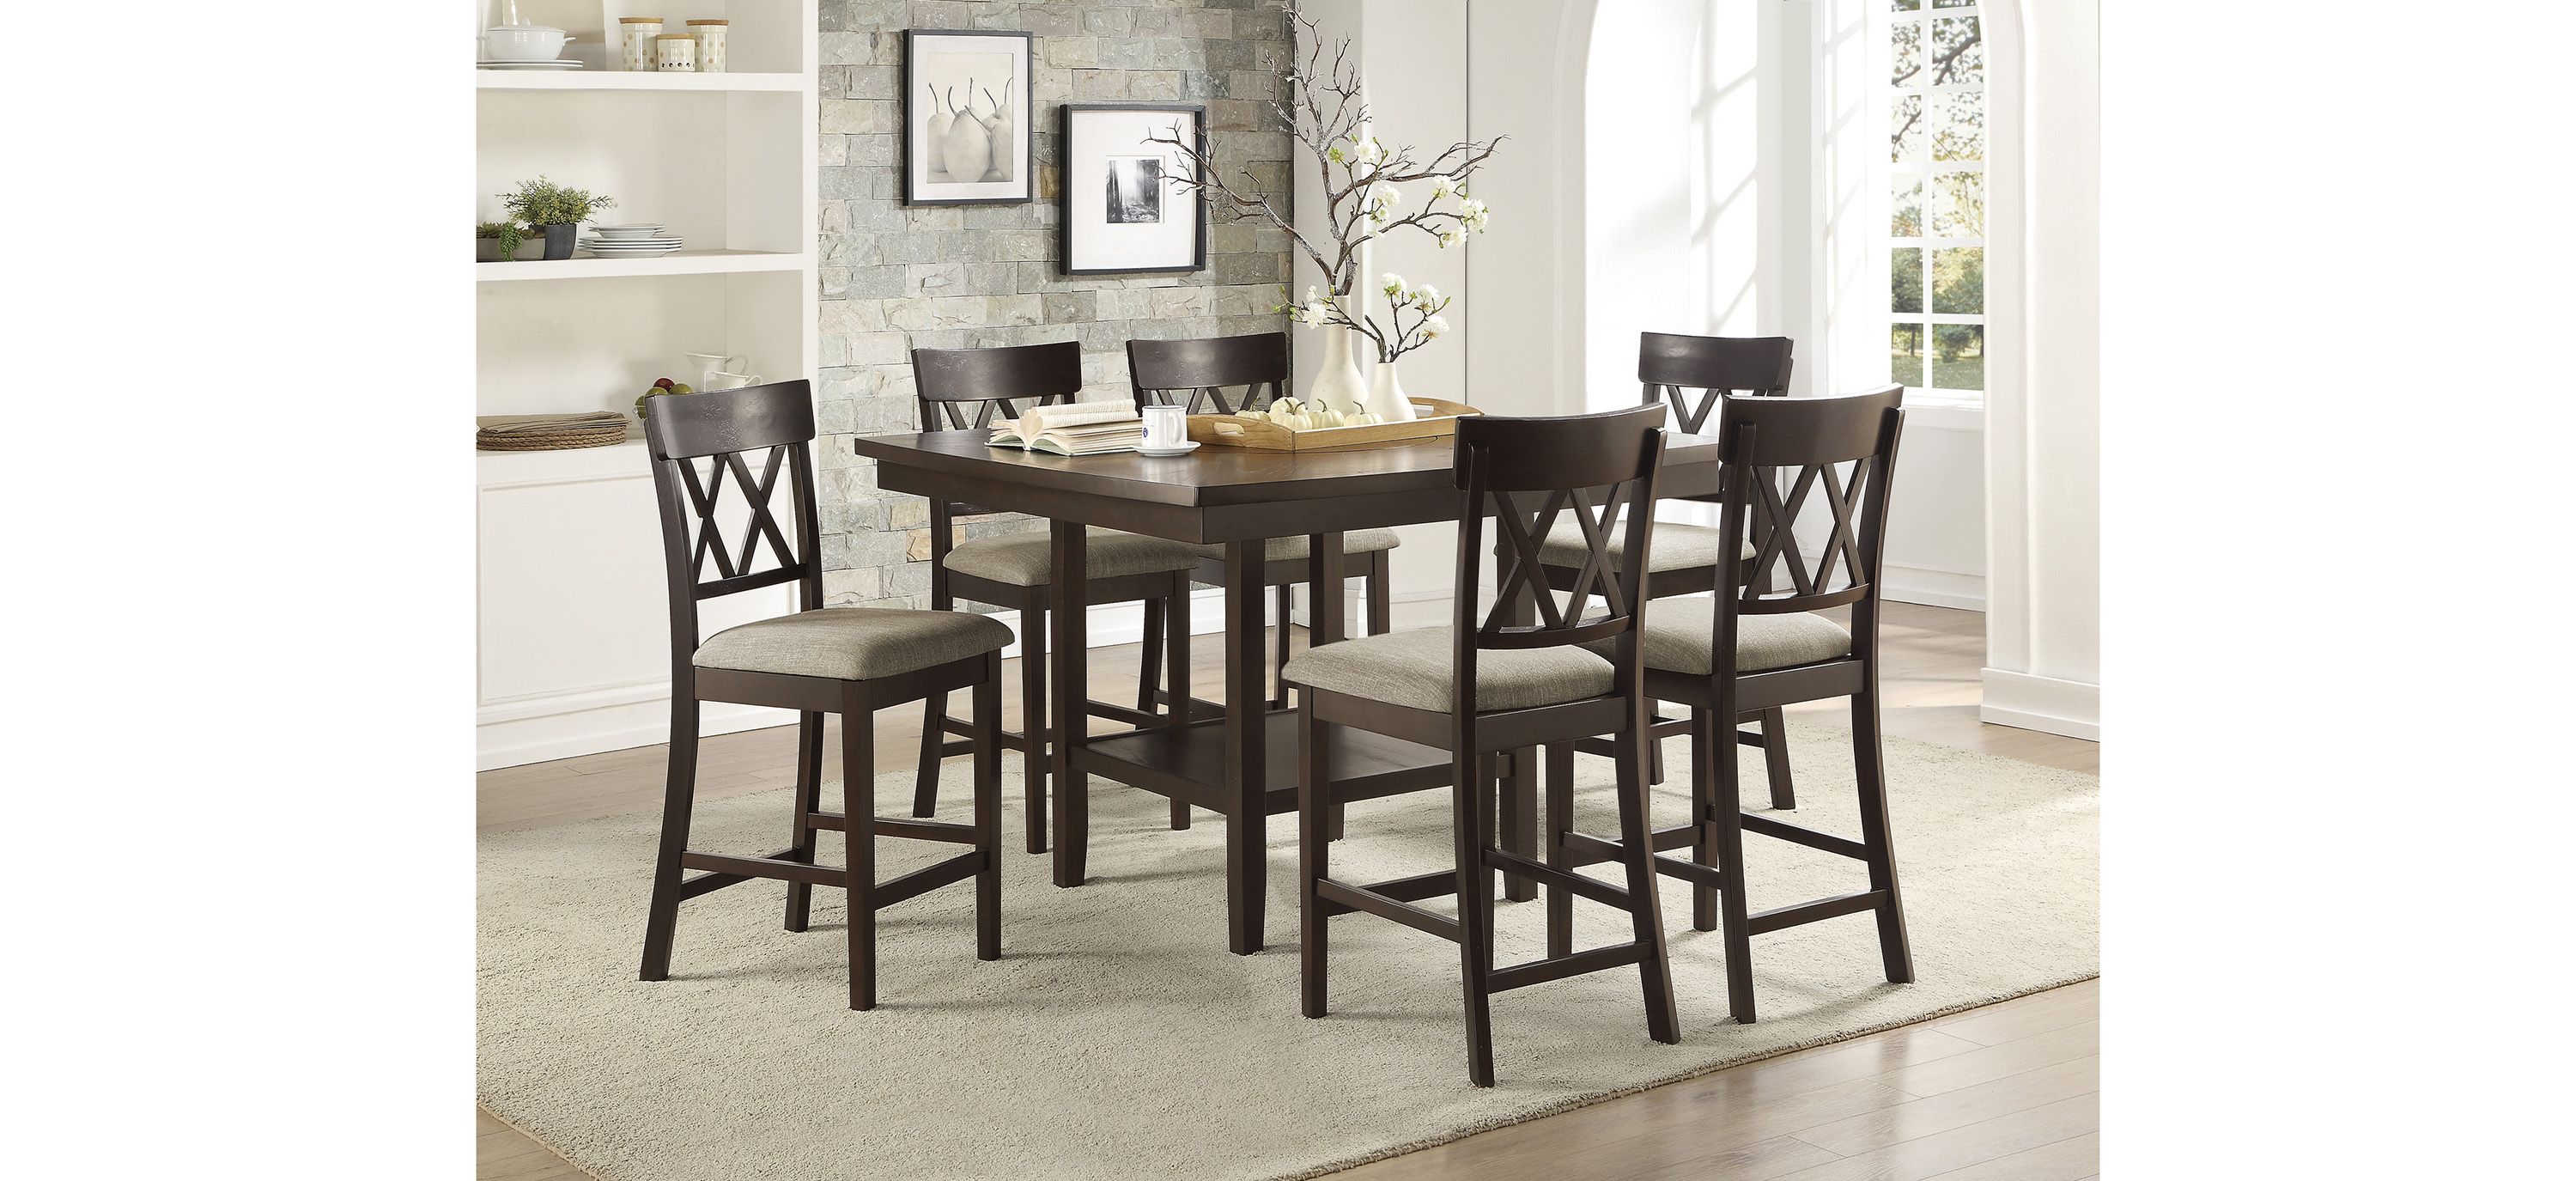 Blair Farm 7-pc. Counter Height Dining Set with Cross Back Chairs